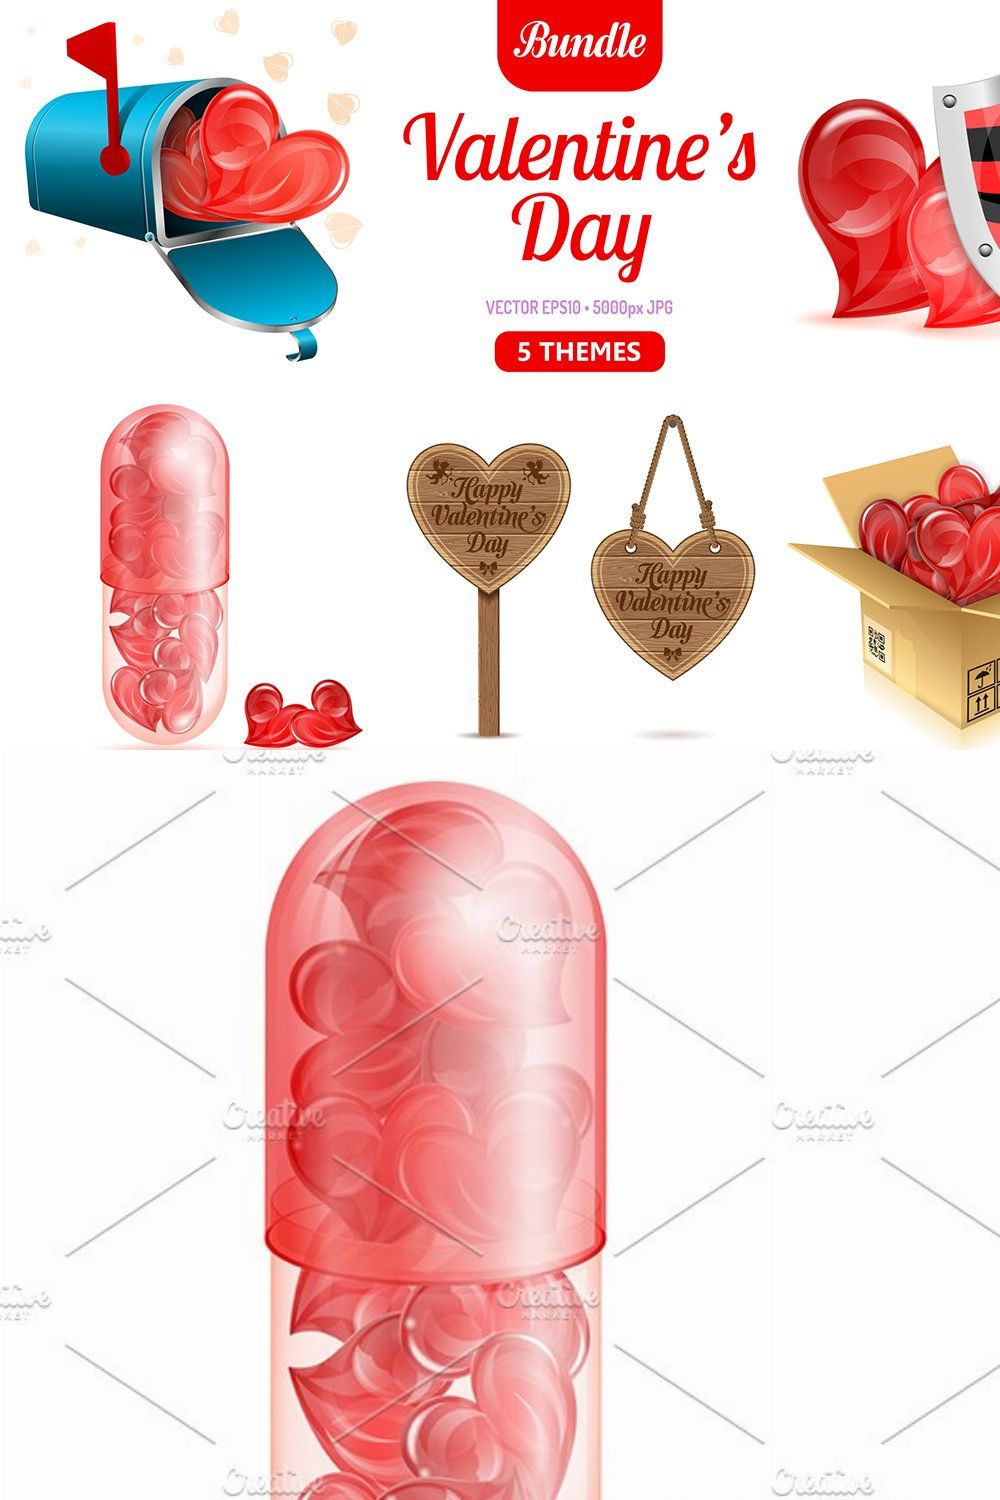 Valentines Day pinterest preview image.